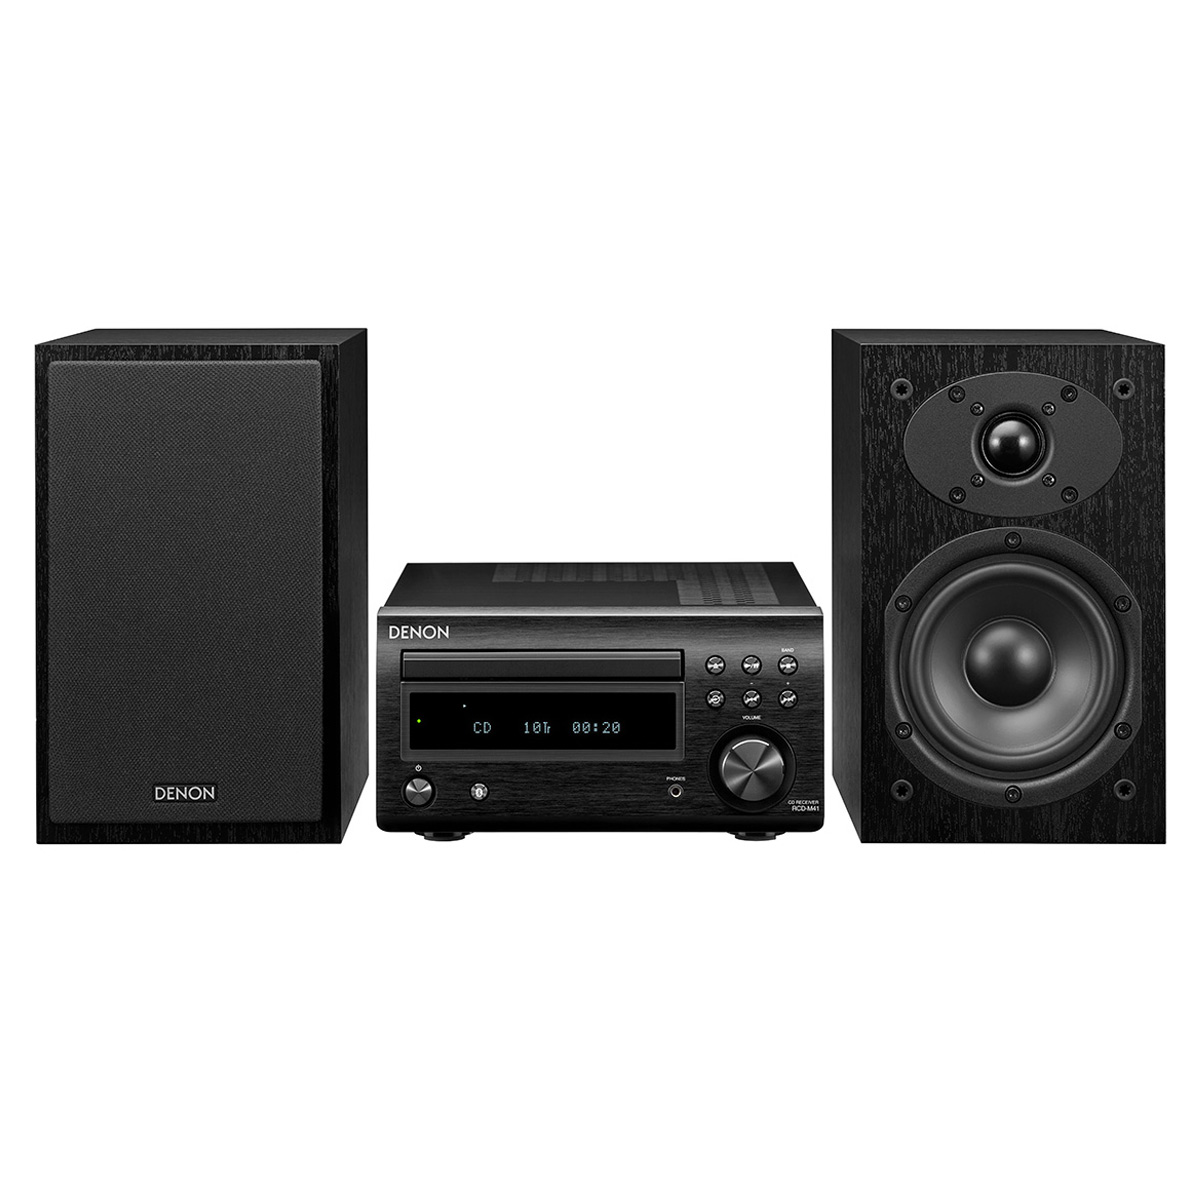 Denon D-M41 Hi-Fi System with CD, Bluetooth, and AM/FM Tuner - image 1 of 3